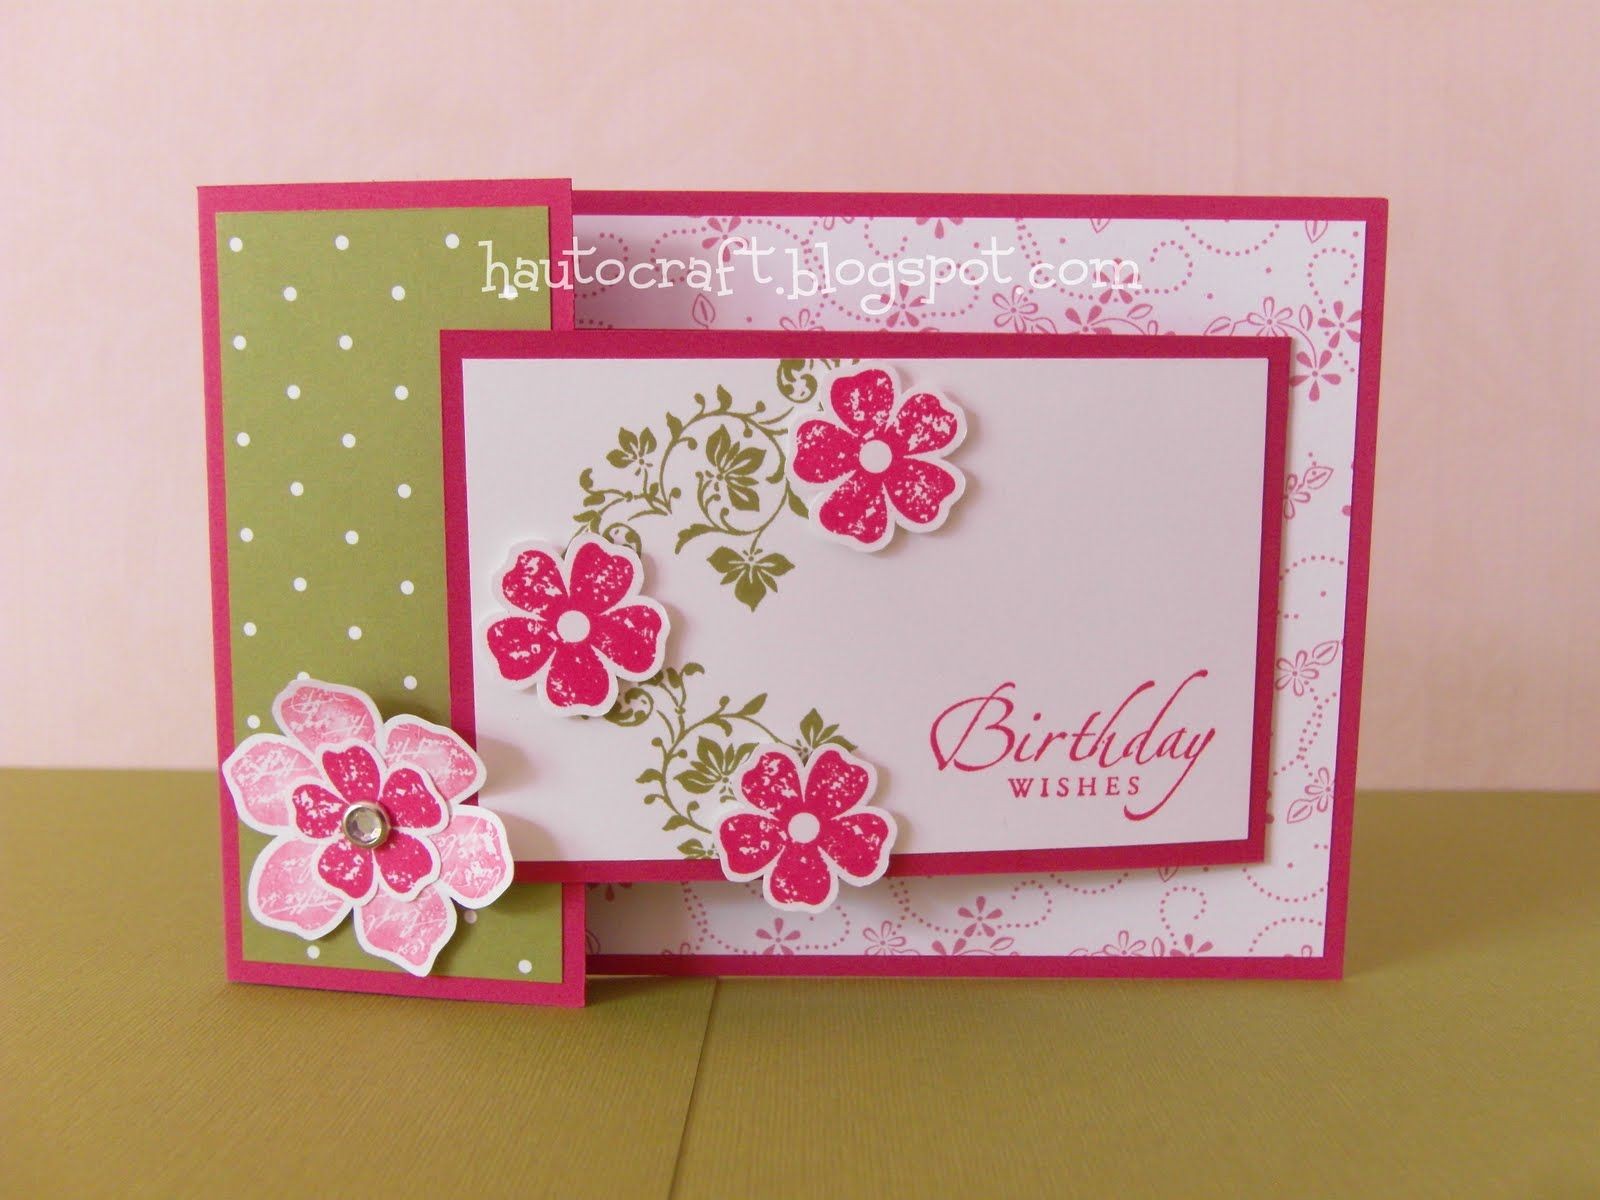 Papercraft Birthday Card Hau to Craft Saturday 3 April 2010 Love the Pink Colors